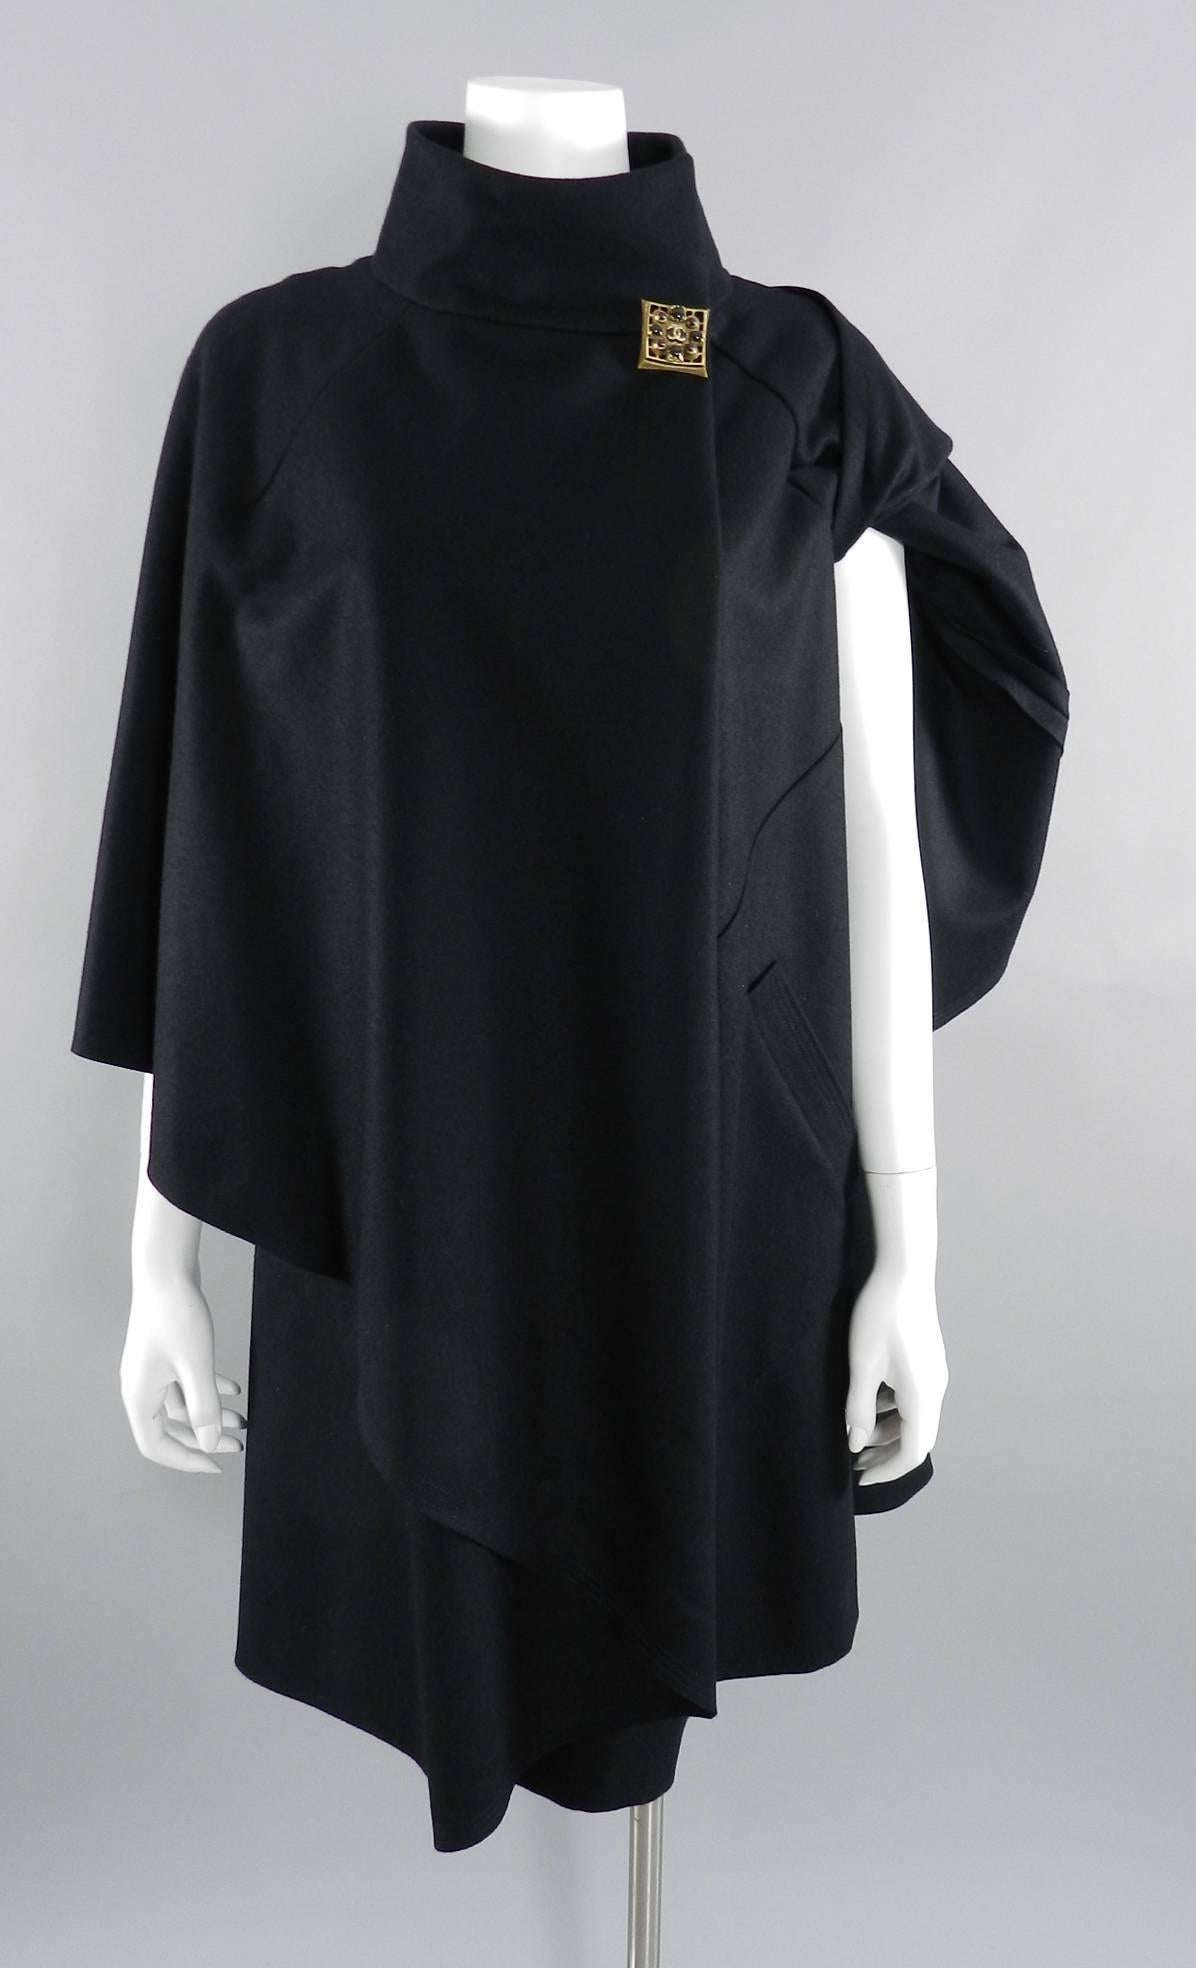 Women's Chanel 11A Byzantine Collection Runway Black Cape